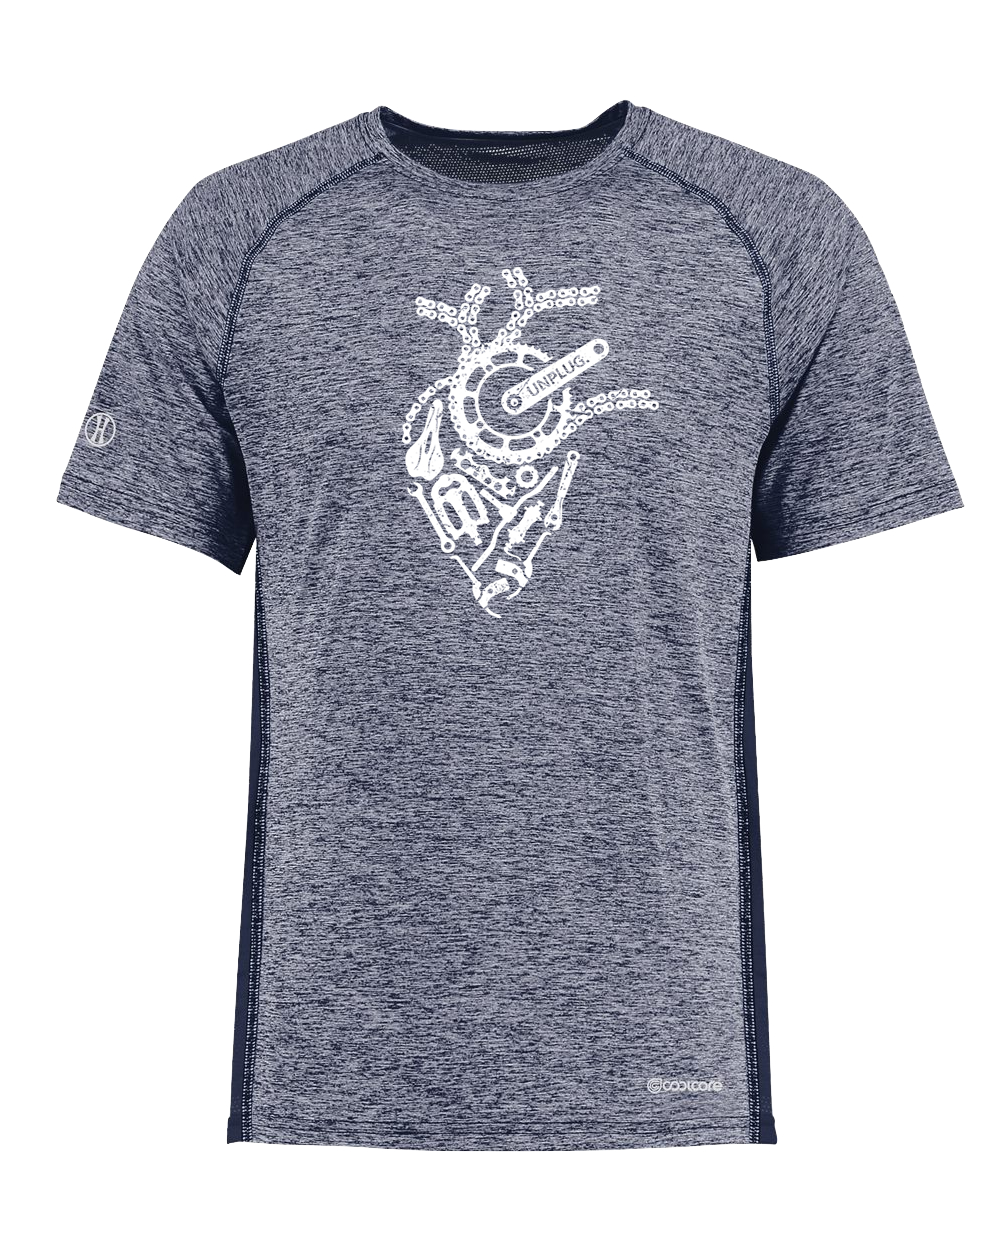 ANATOMICAL HEART (BICYCLE PARTS) Poly/Elastane High Performance T-Shirt with UPF 50+